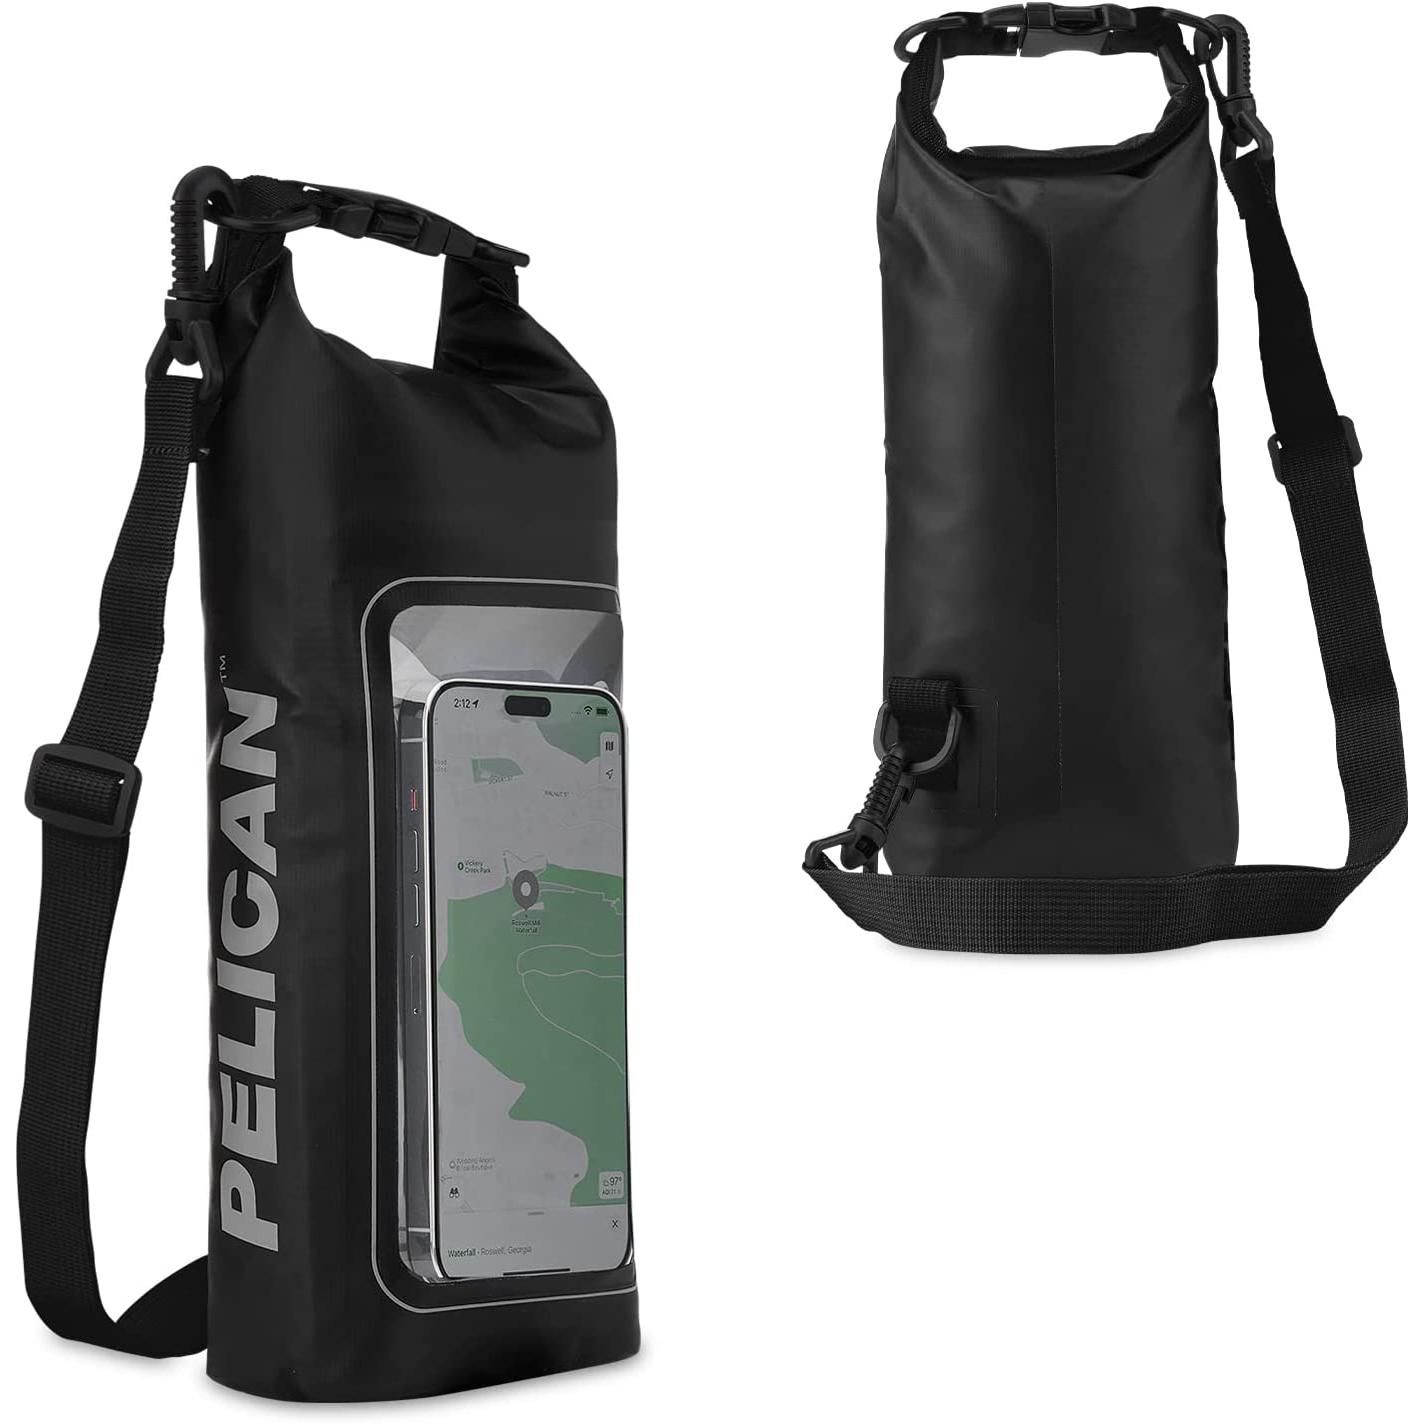 Pelican Marine IP68 Water Resistant Dry Bag with Phone Pouch for $17.49